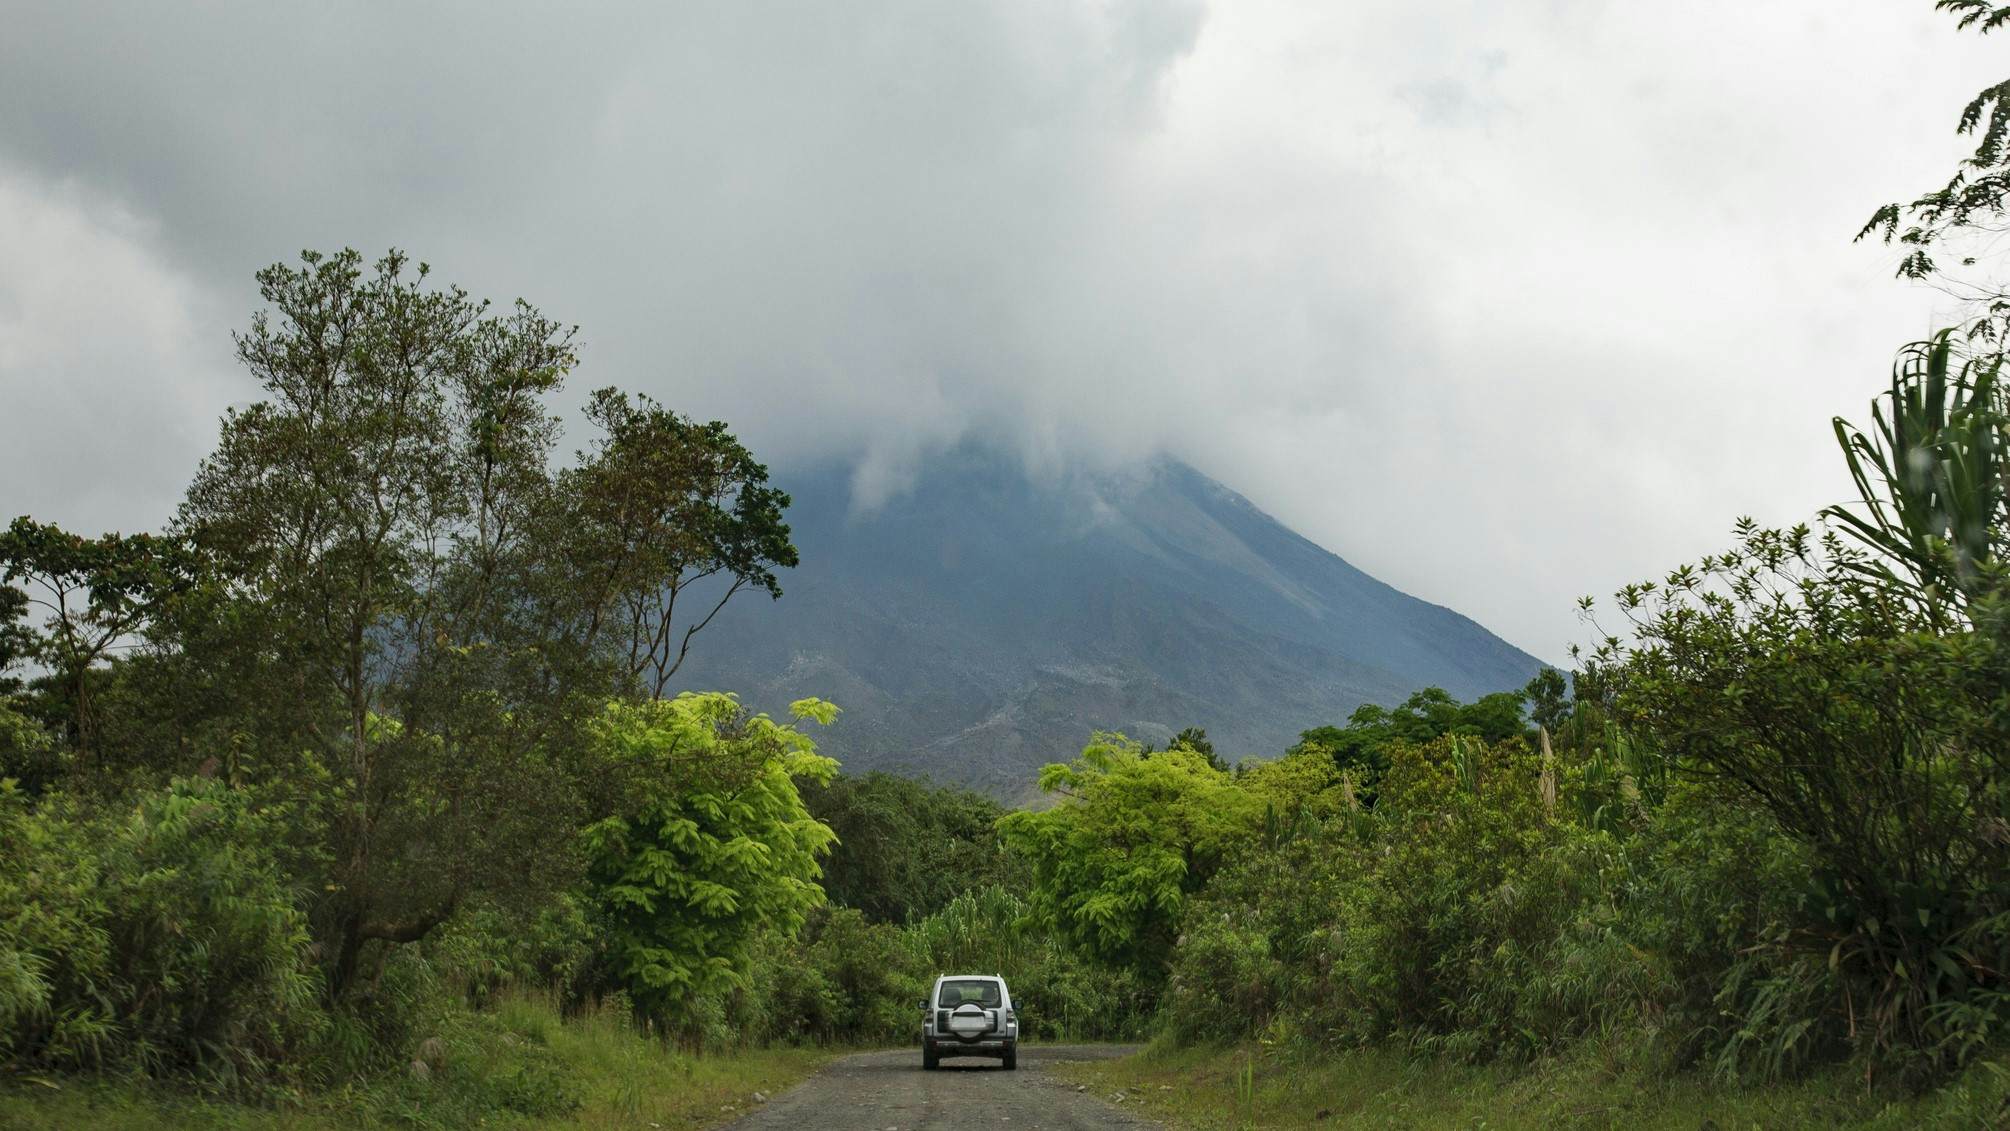 Costa Rica Travel Guide - Lonely Planet